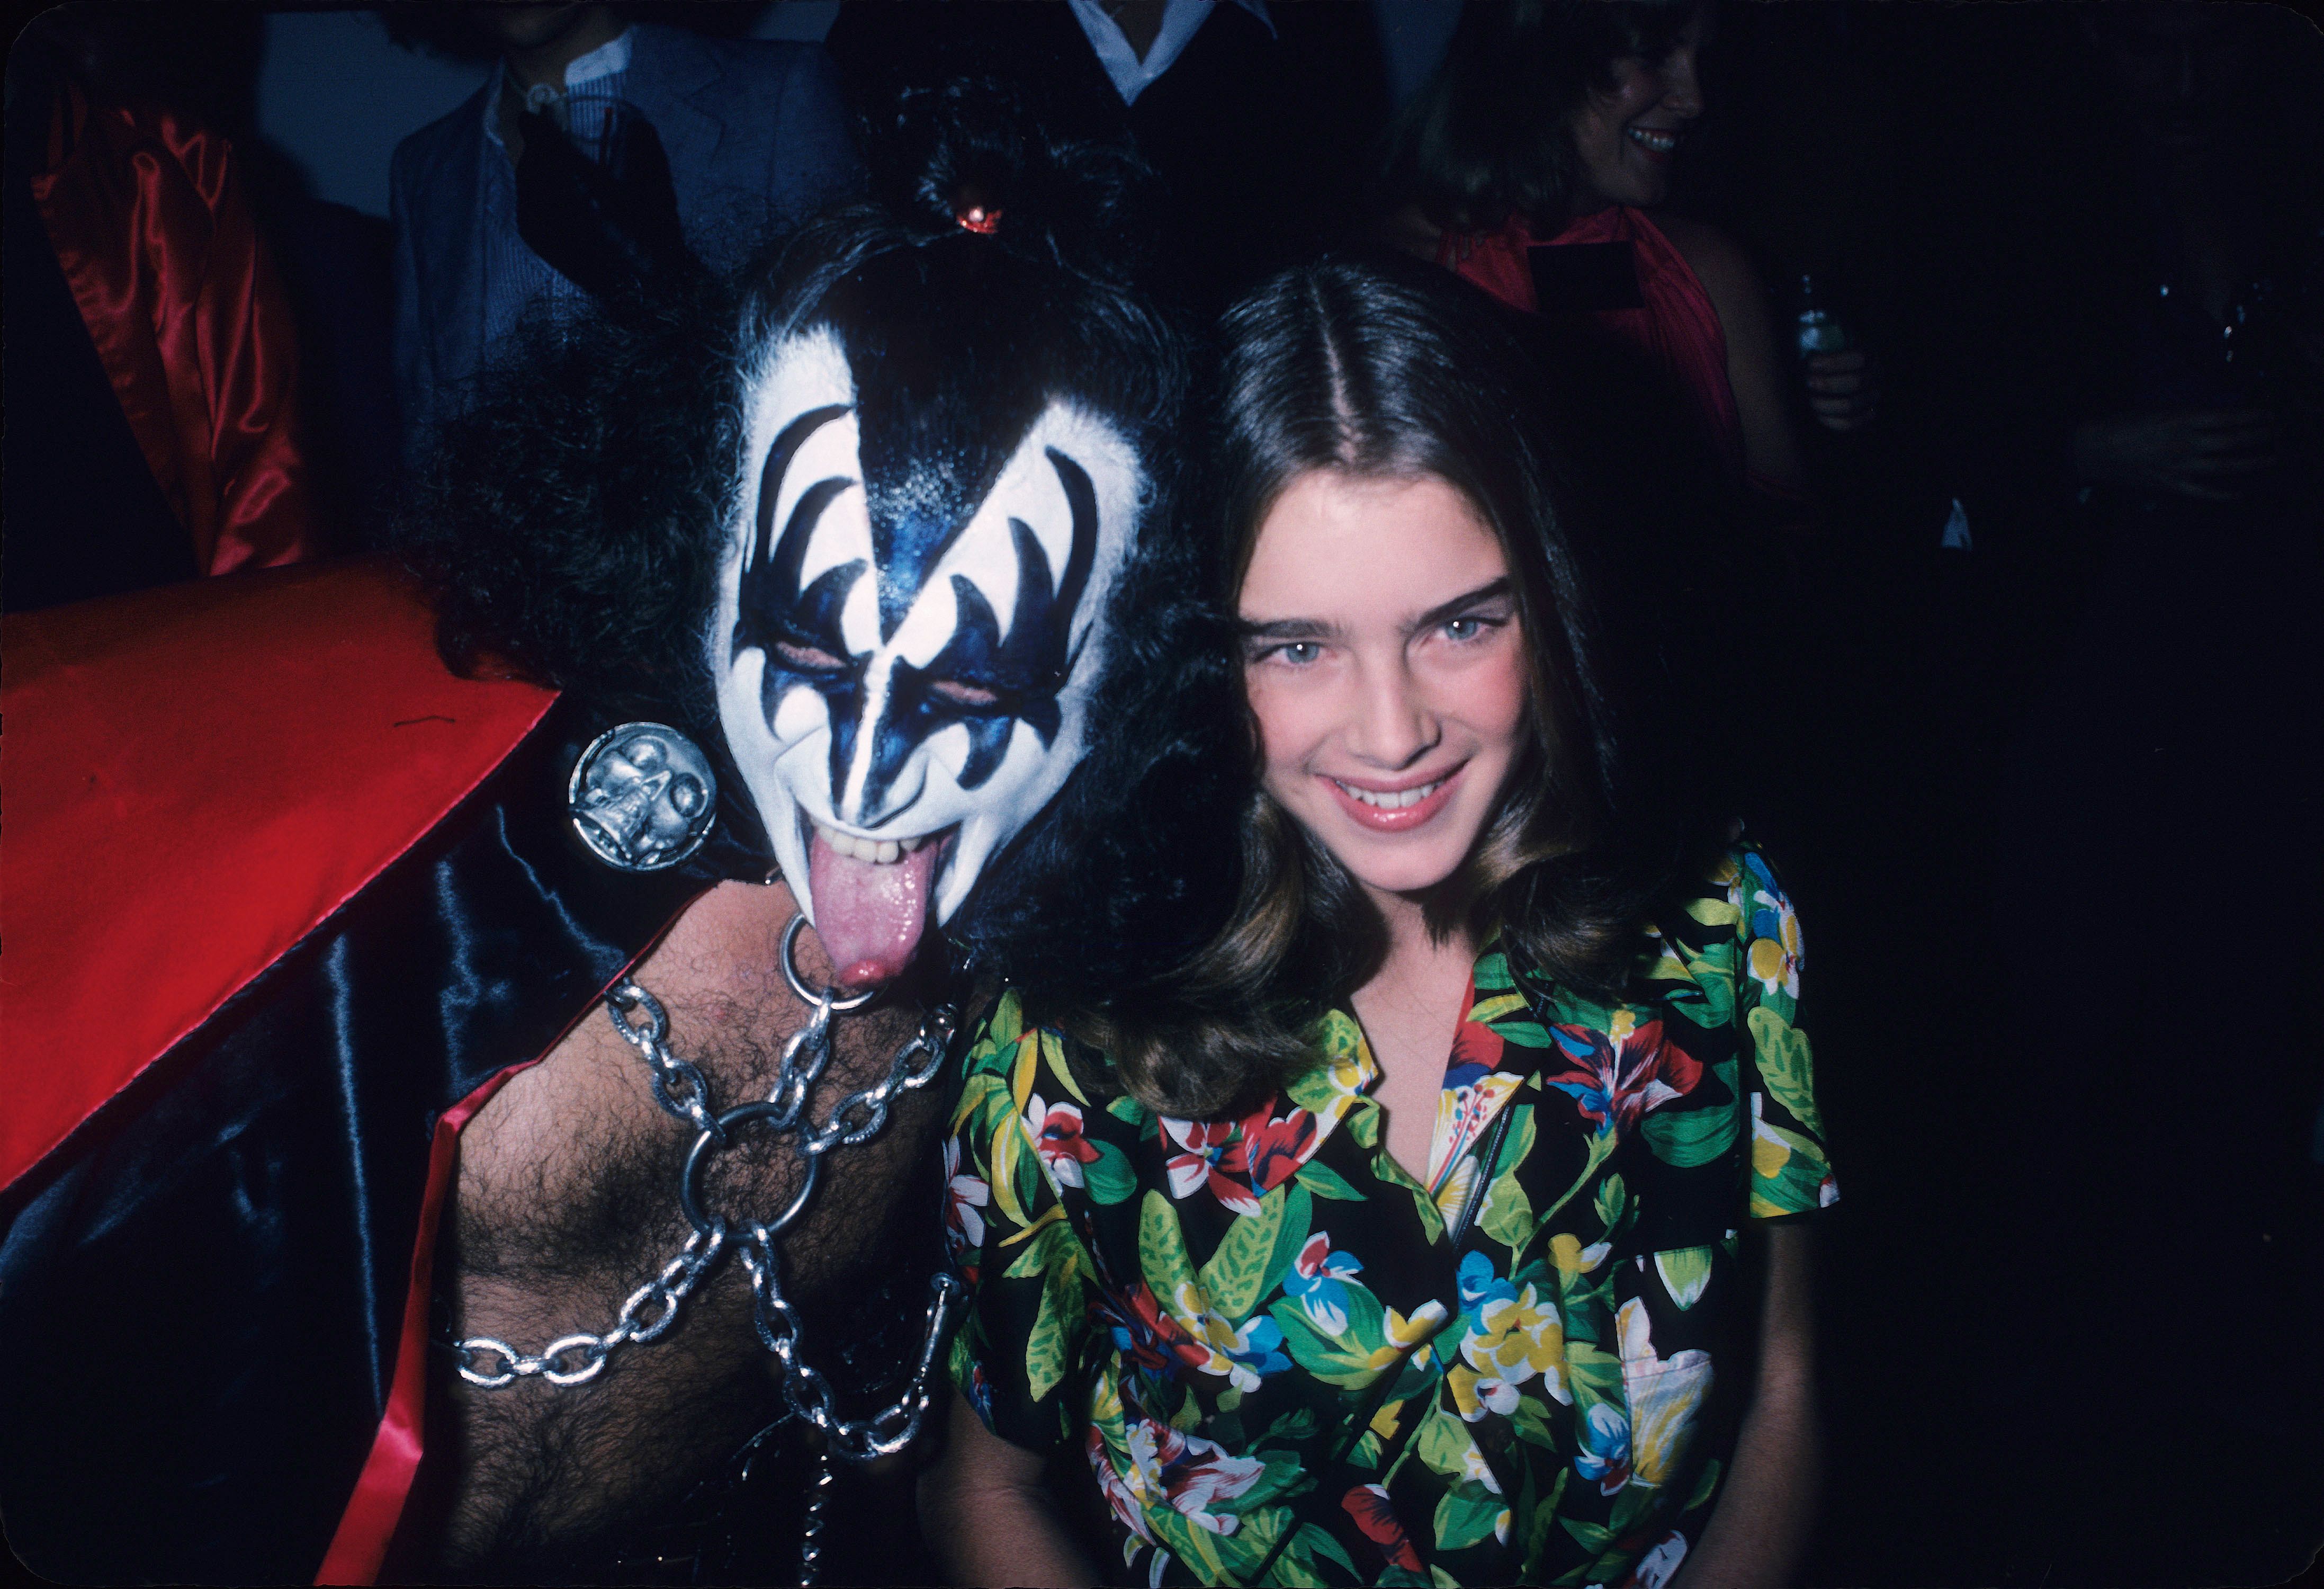 25 amazing photos of a young Brooke Shields - Hot Lifestyle News